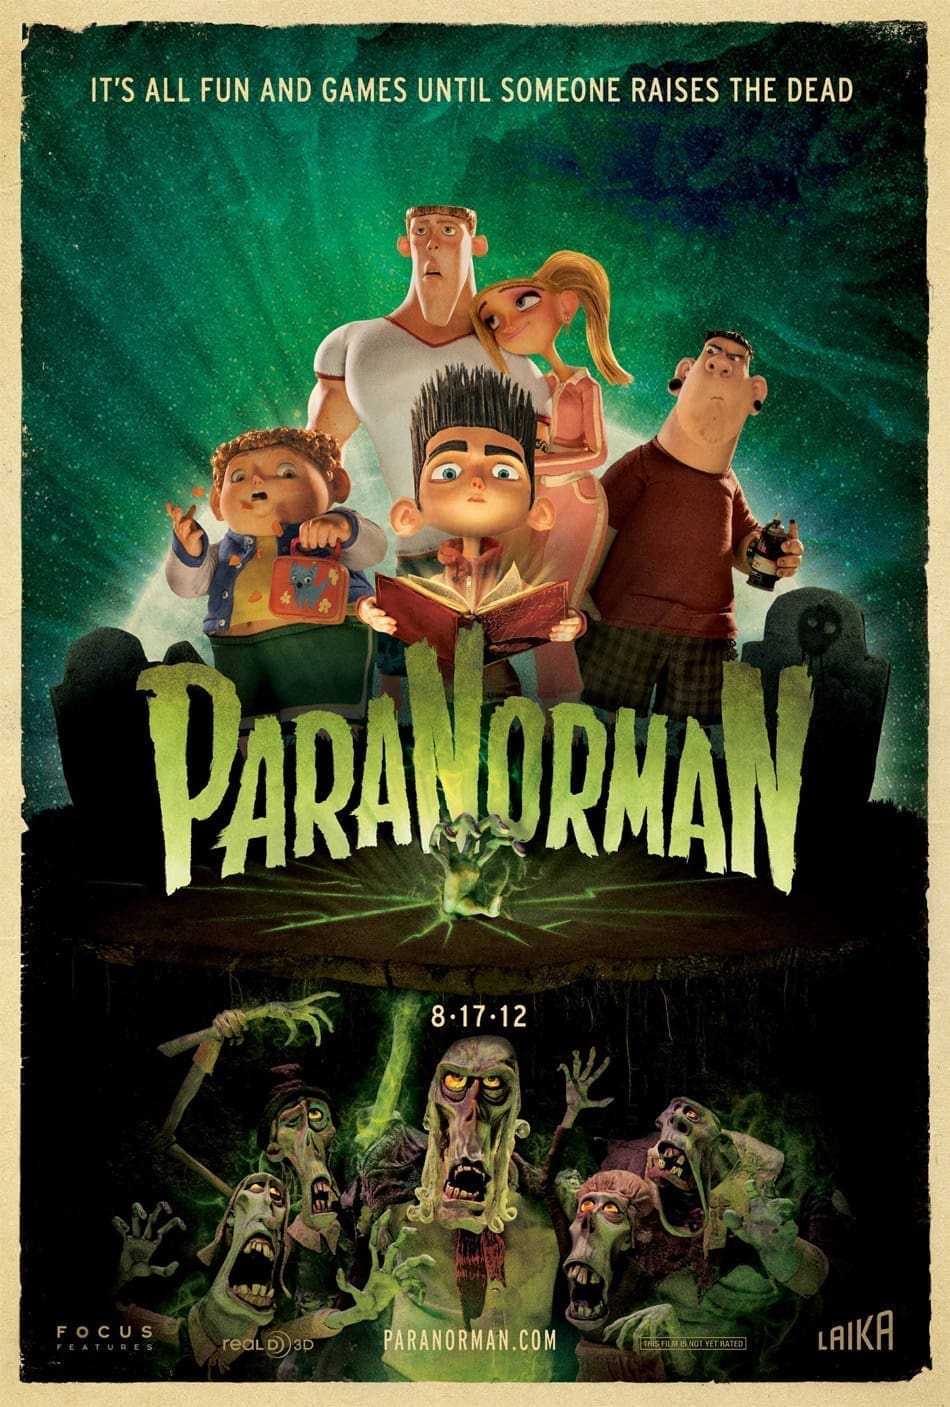 film, focus pictures, ghosts, laika, movie, paranorman, review, supernatural, witches, zombies